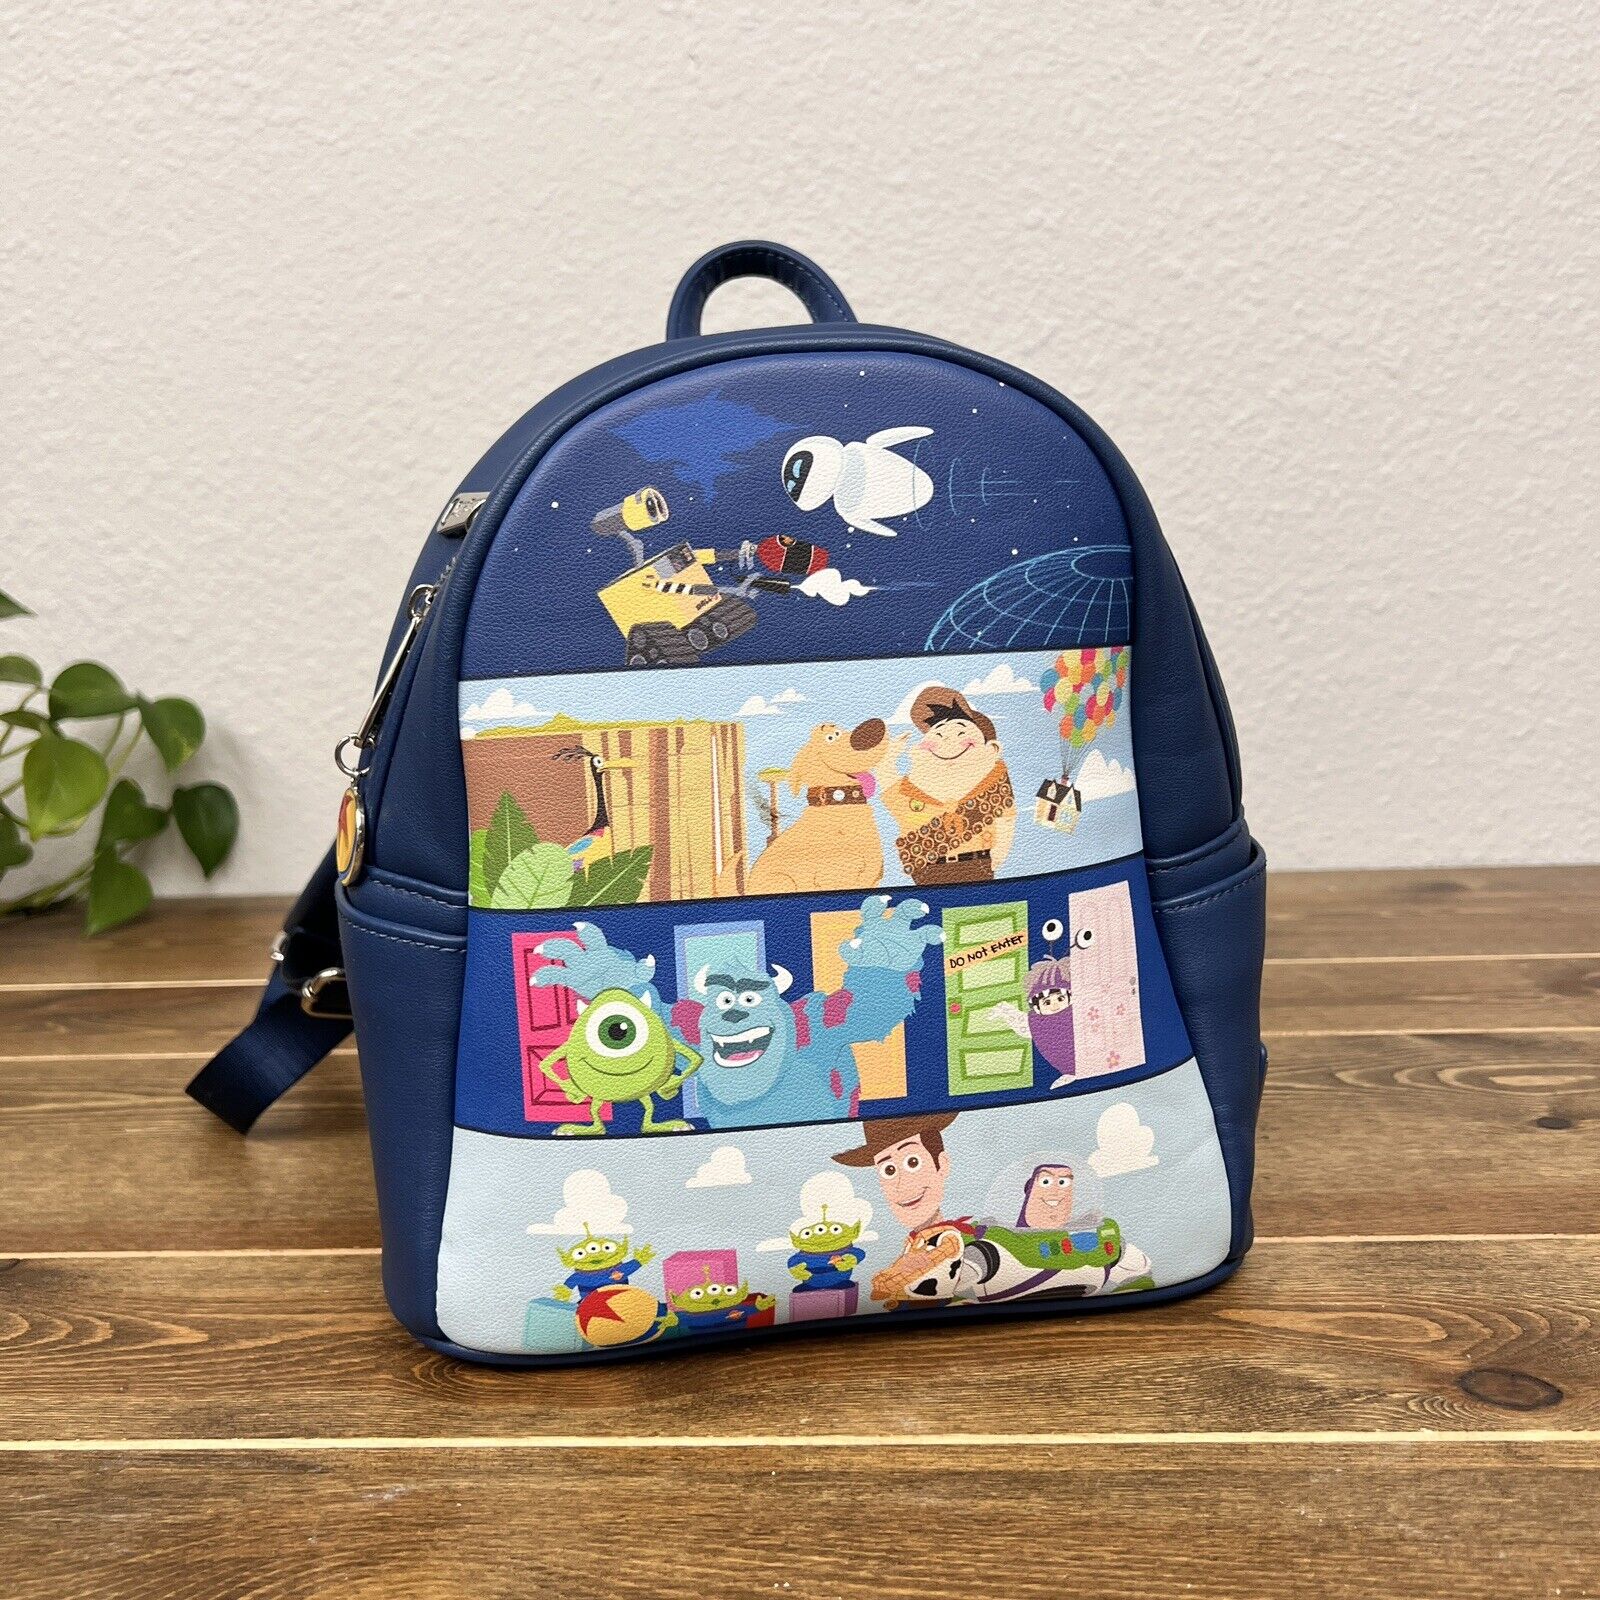 Loungefly Disney Pixar Mini Backpack Panel Scenes Toy Story Monsters Inc UP